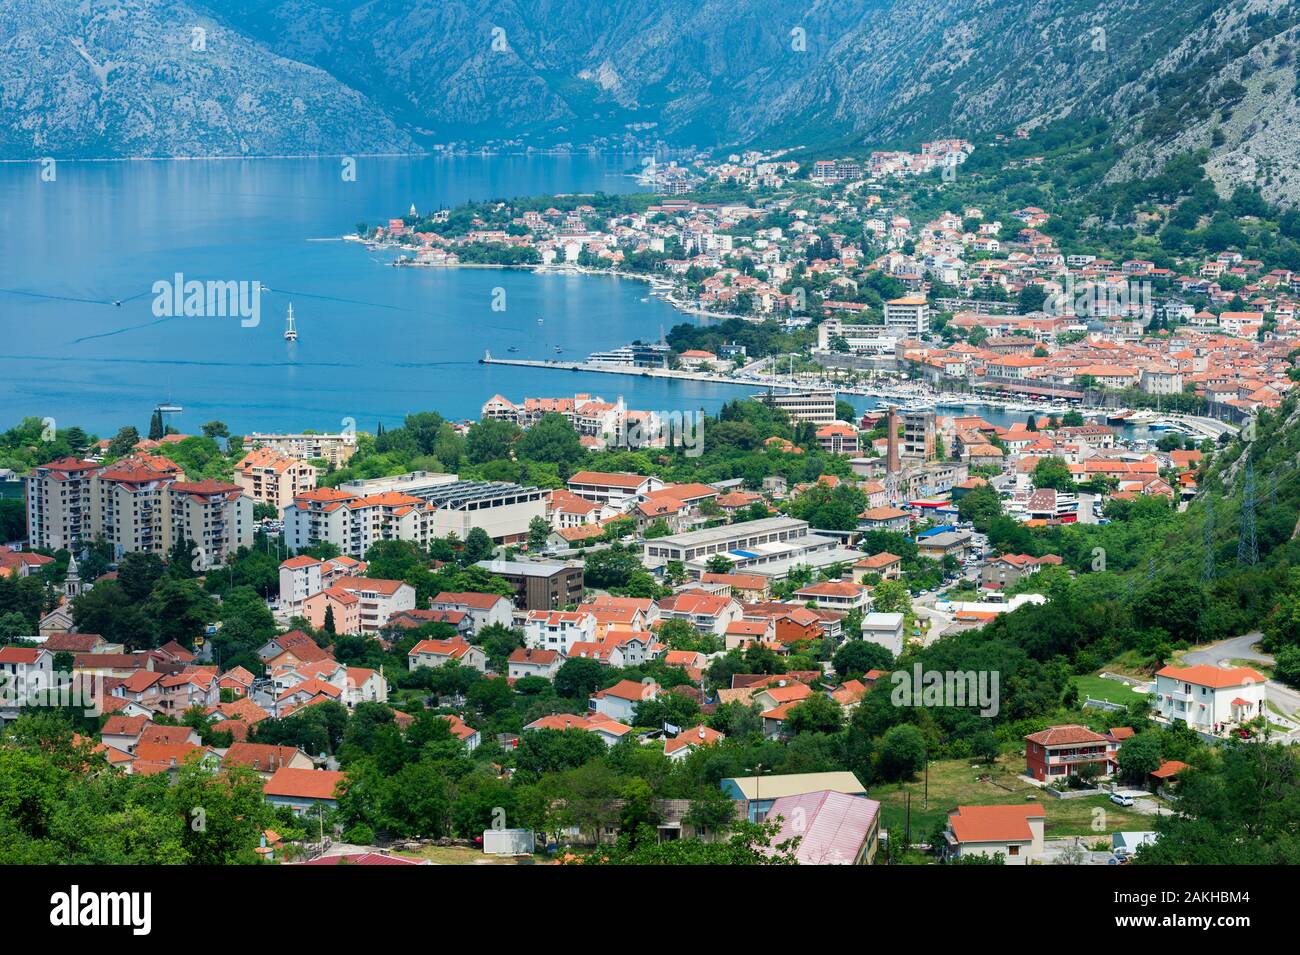 Aerial view over Kotor and Kotor Bay surrounded by mountains, Unesco World Heritage Site, Kotor, Montenegro Stock Photo